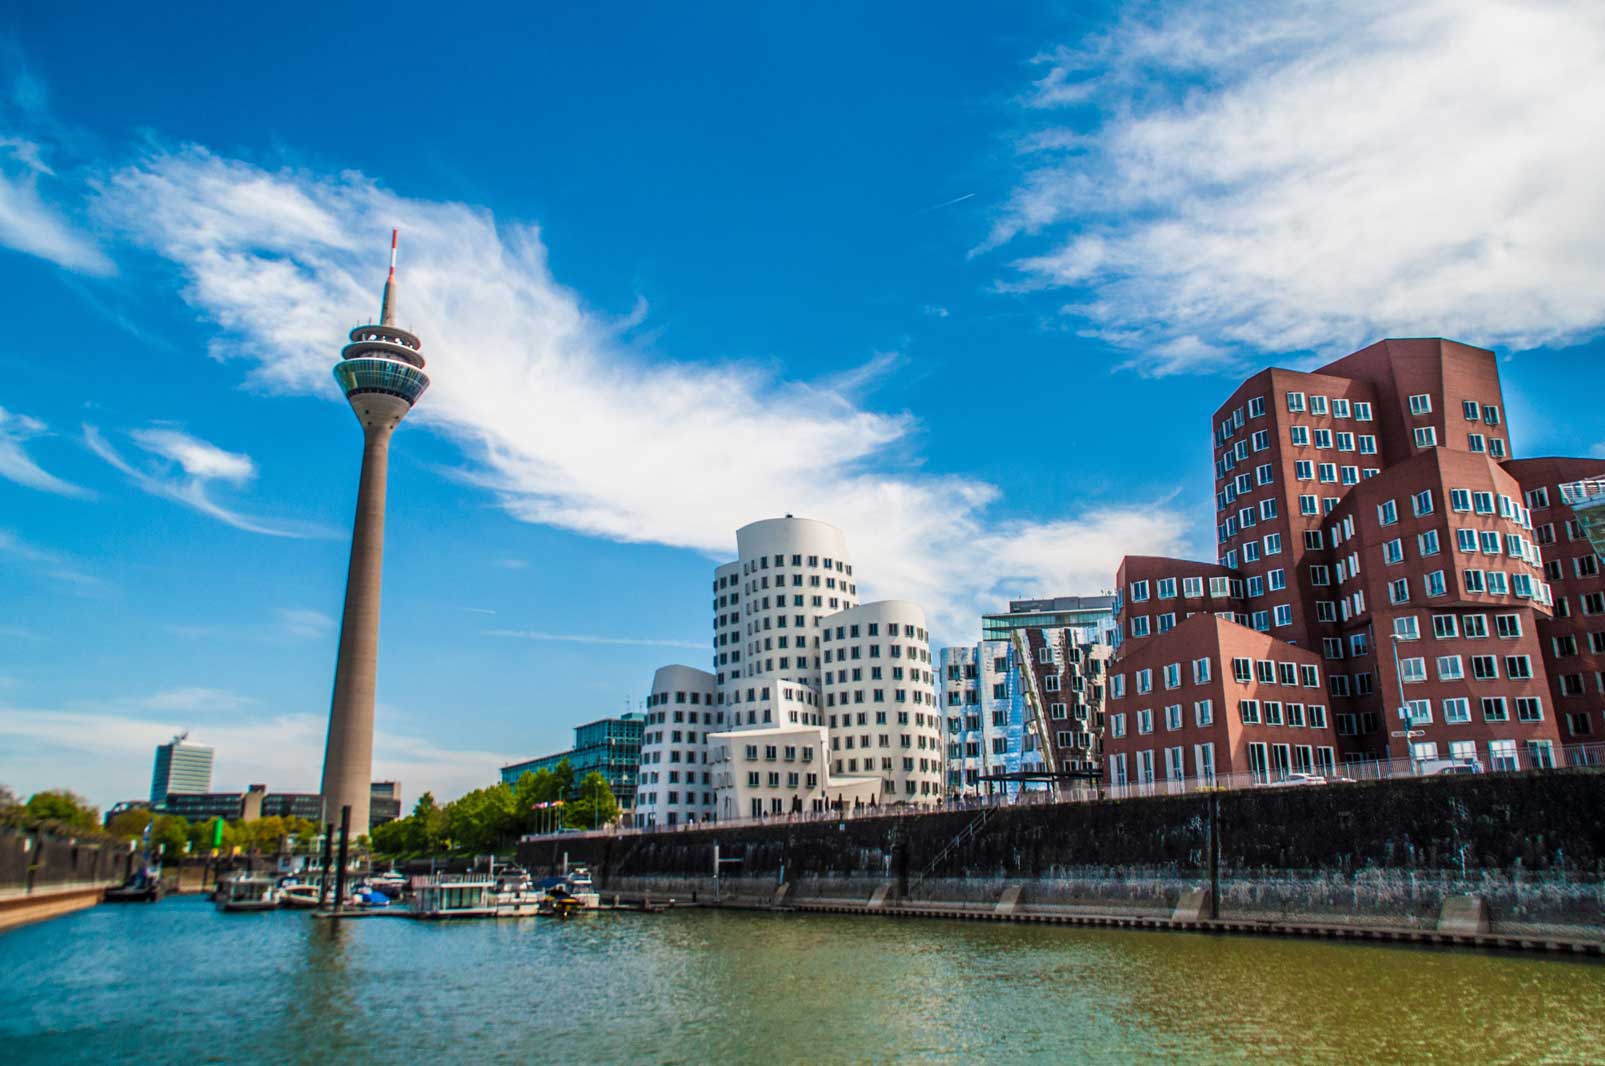 The MedienHafen in Düsseldorf with architecture by Frank O. Gehry.